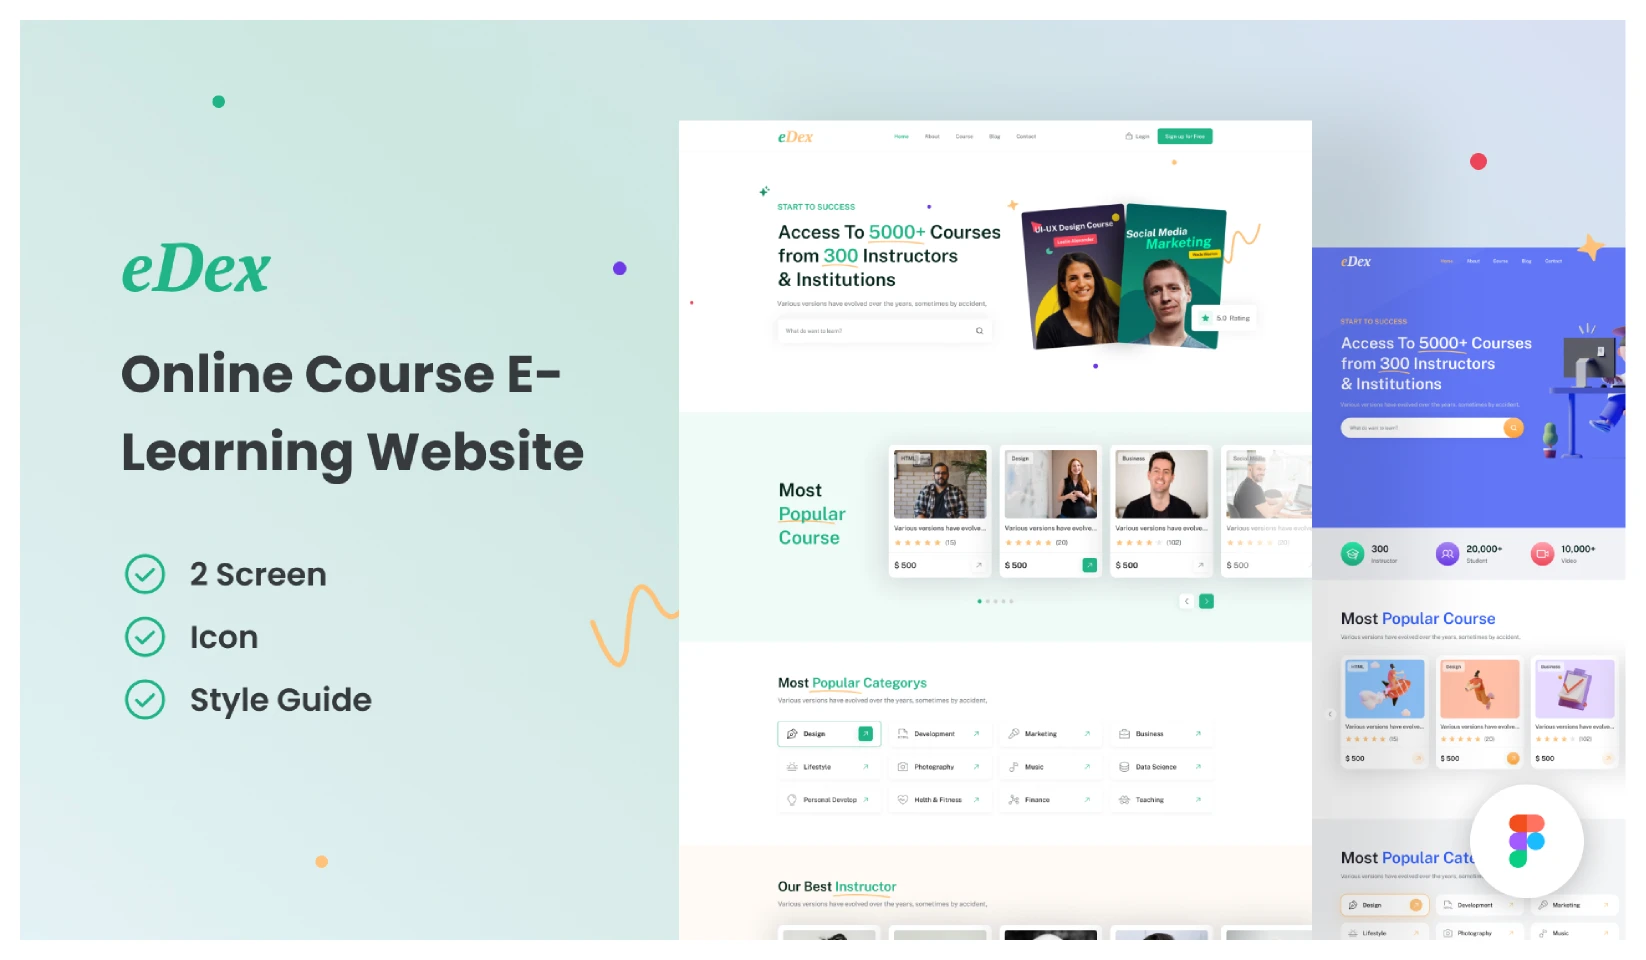 eDex - Online Course E-Learning Website (Comunity) for Figma and Adobe XD